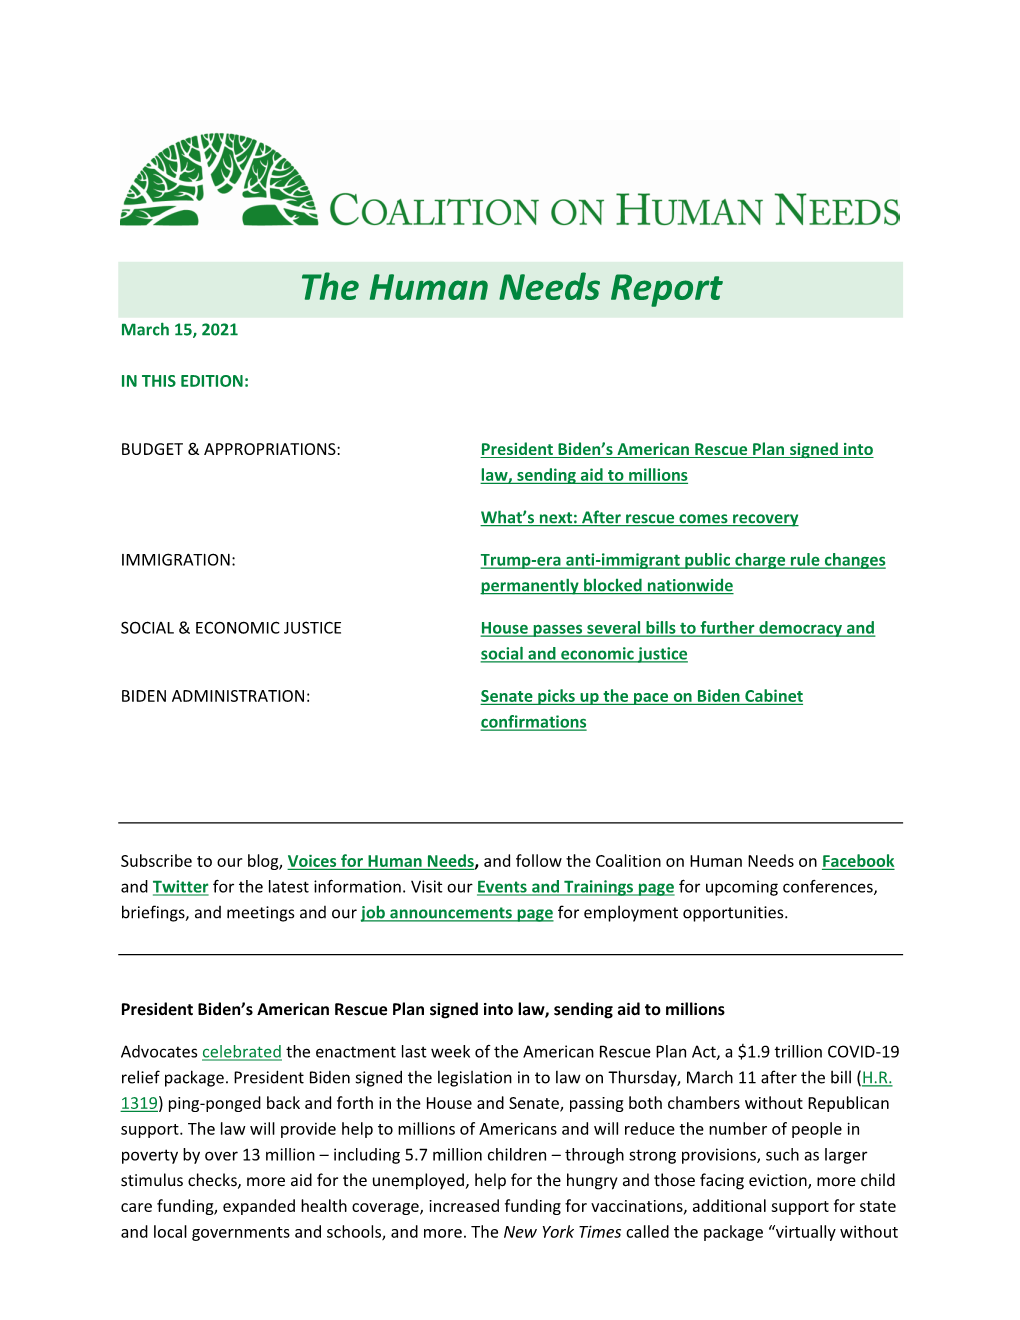 The Human Needs Report March 15, 2021